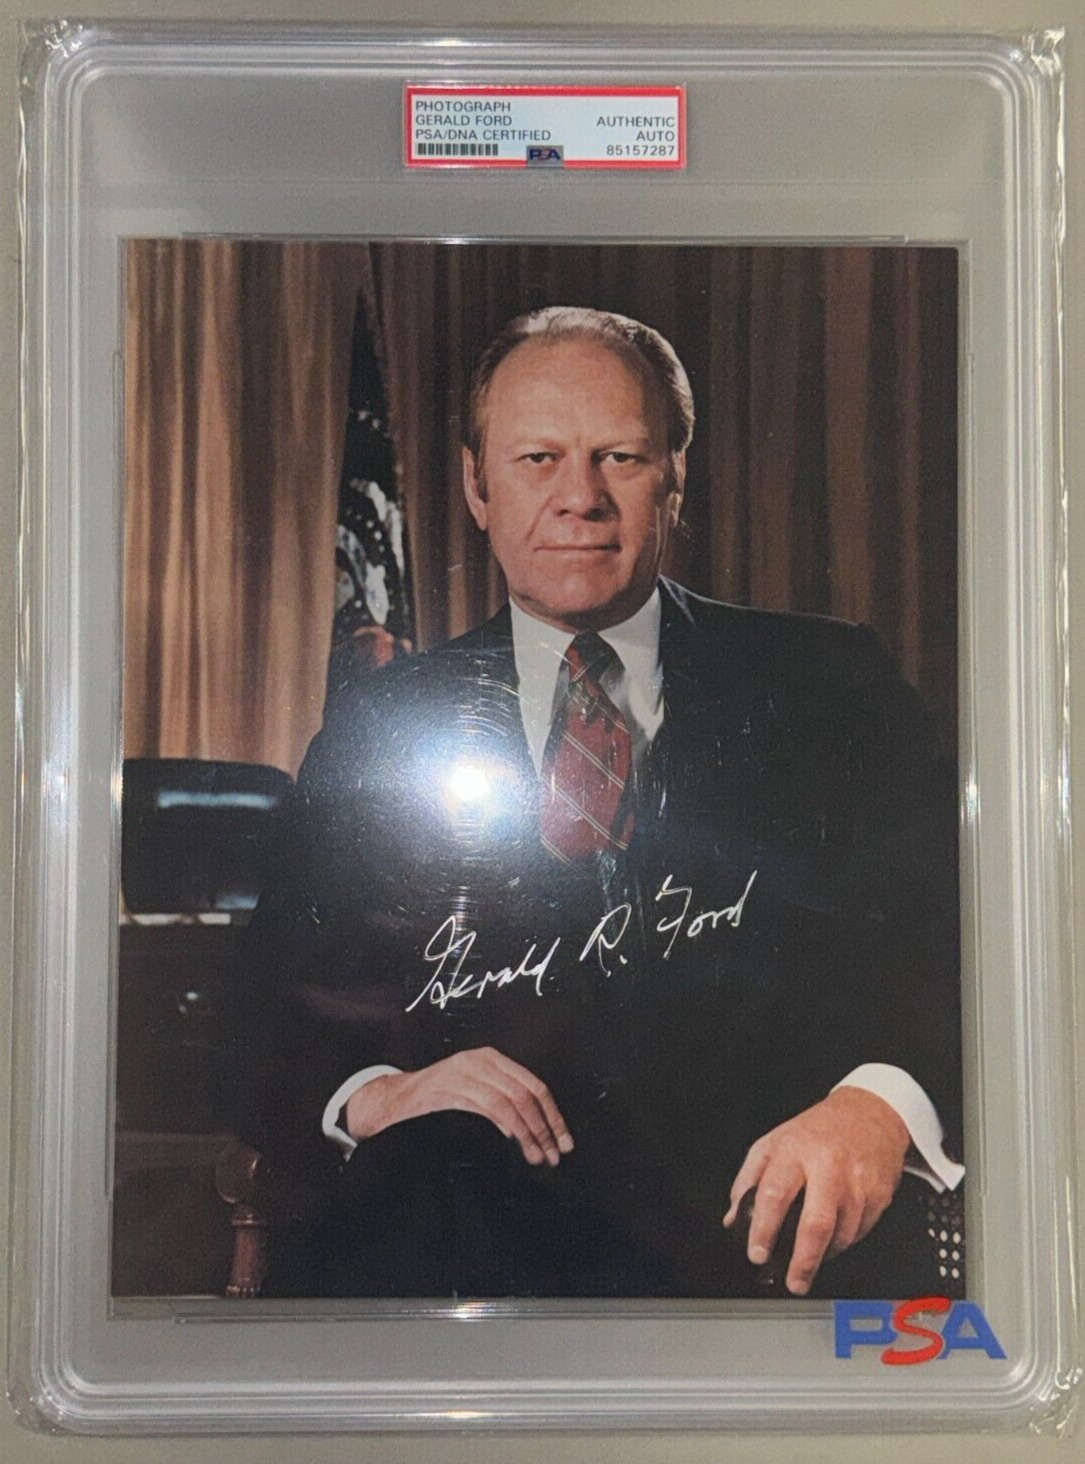 Gerald Ford 8x10 Photo Signed Encapsulated PSA/DNA Certified Authentic Autograph